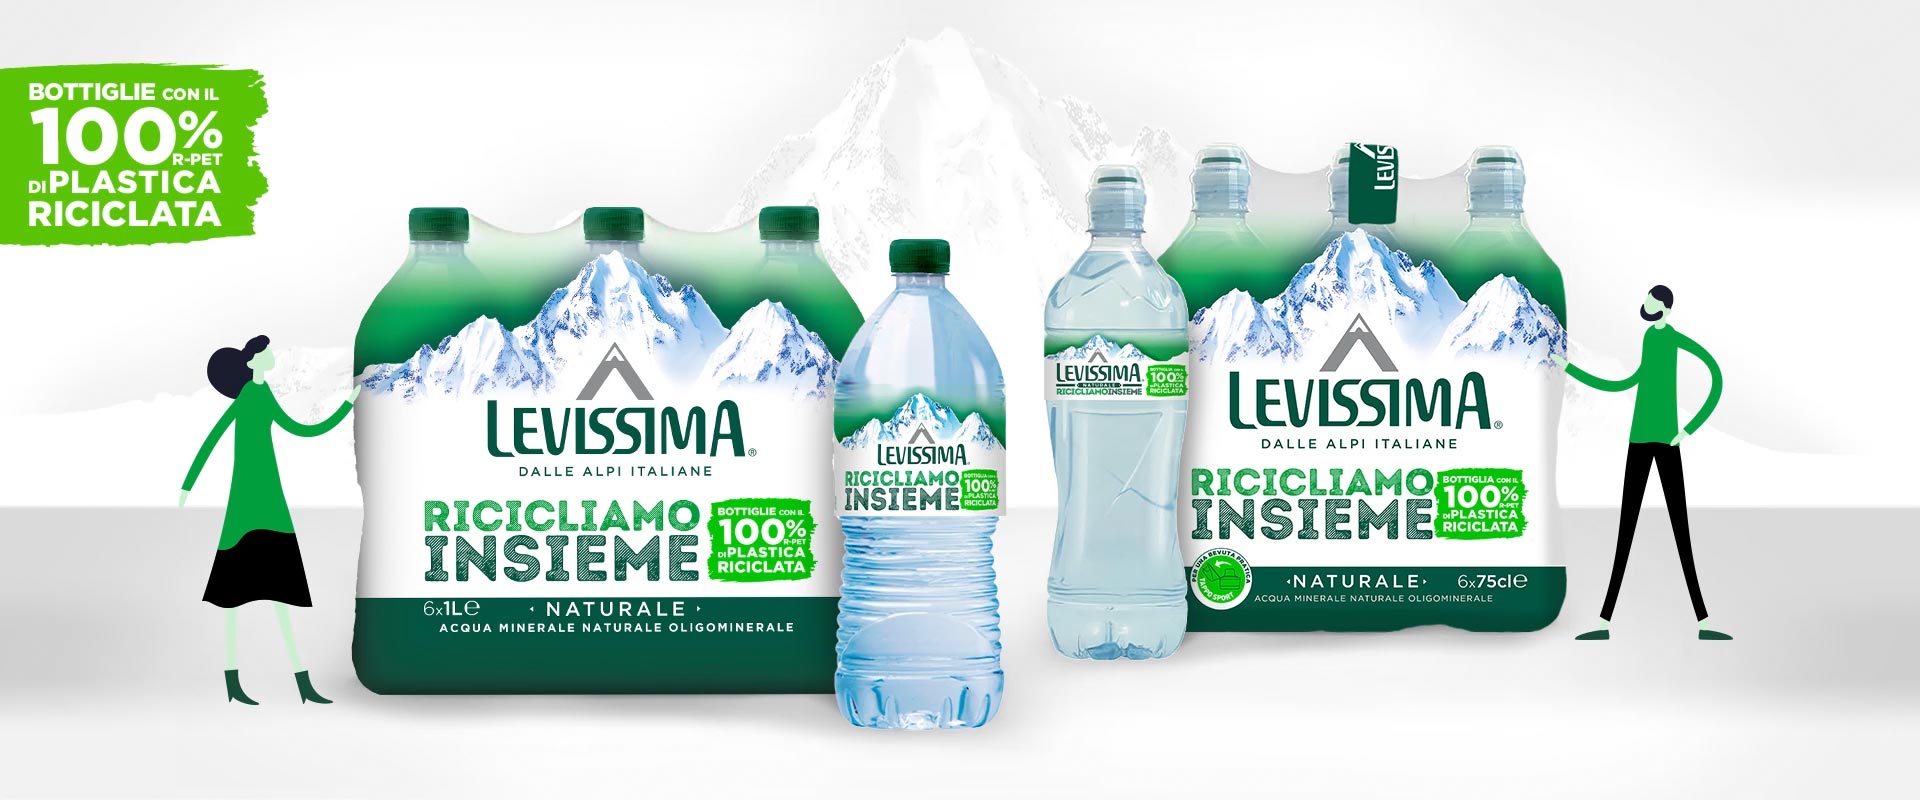 Levissima, new bottles with 100% recycled plastic